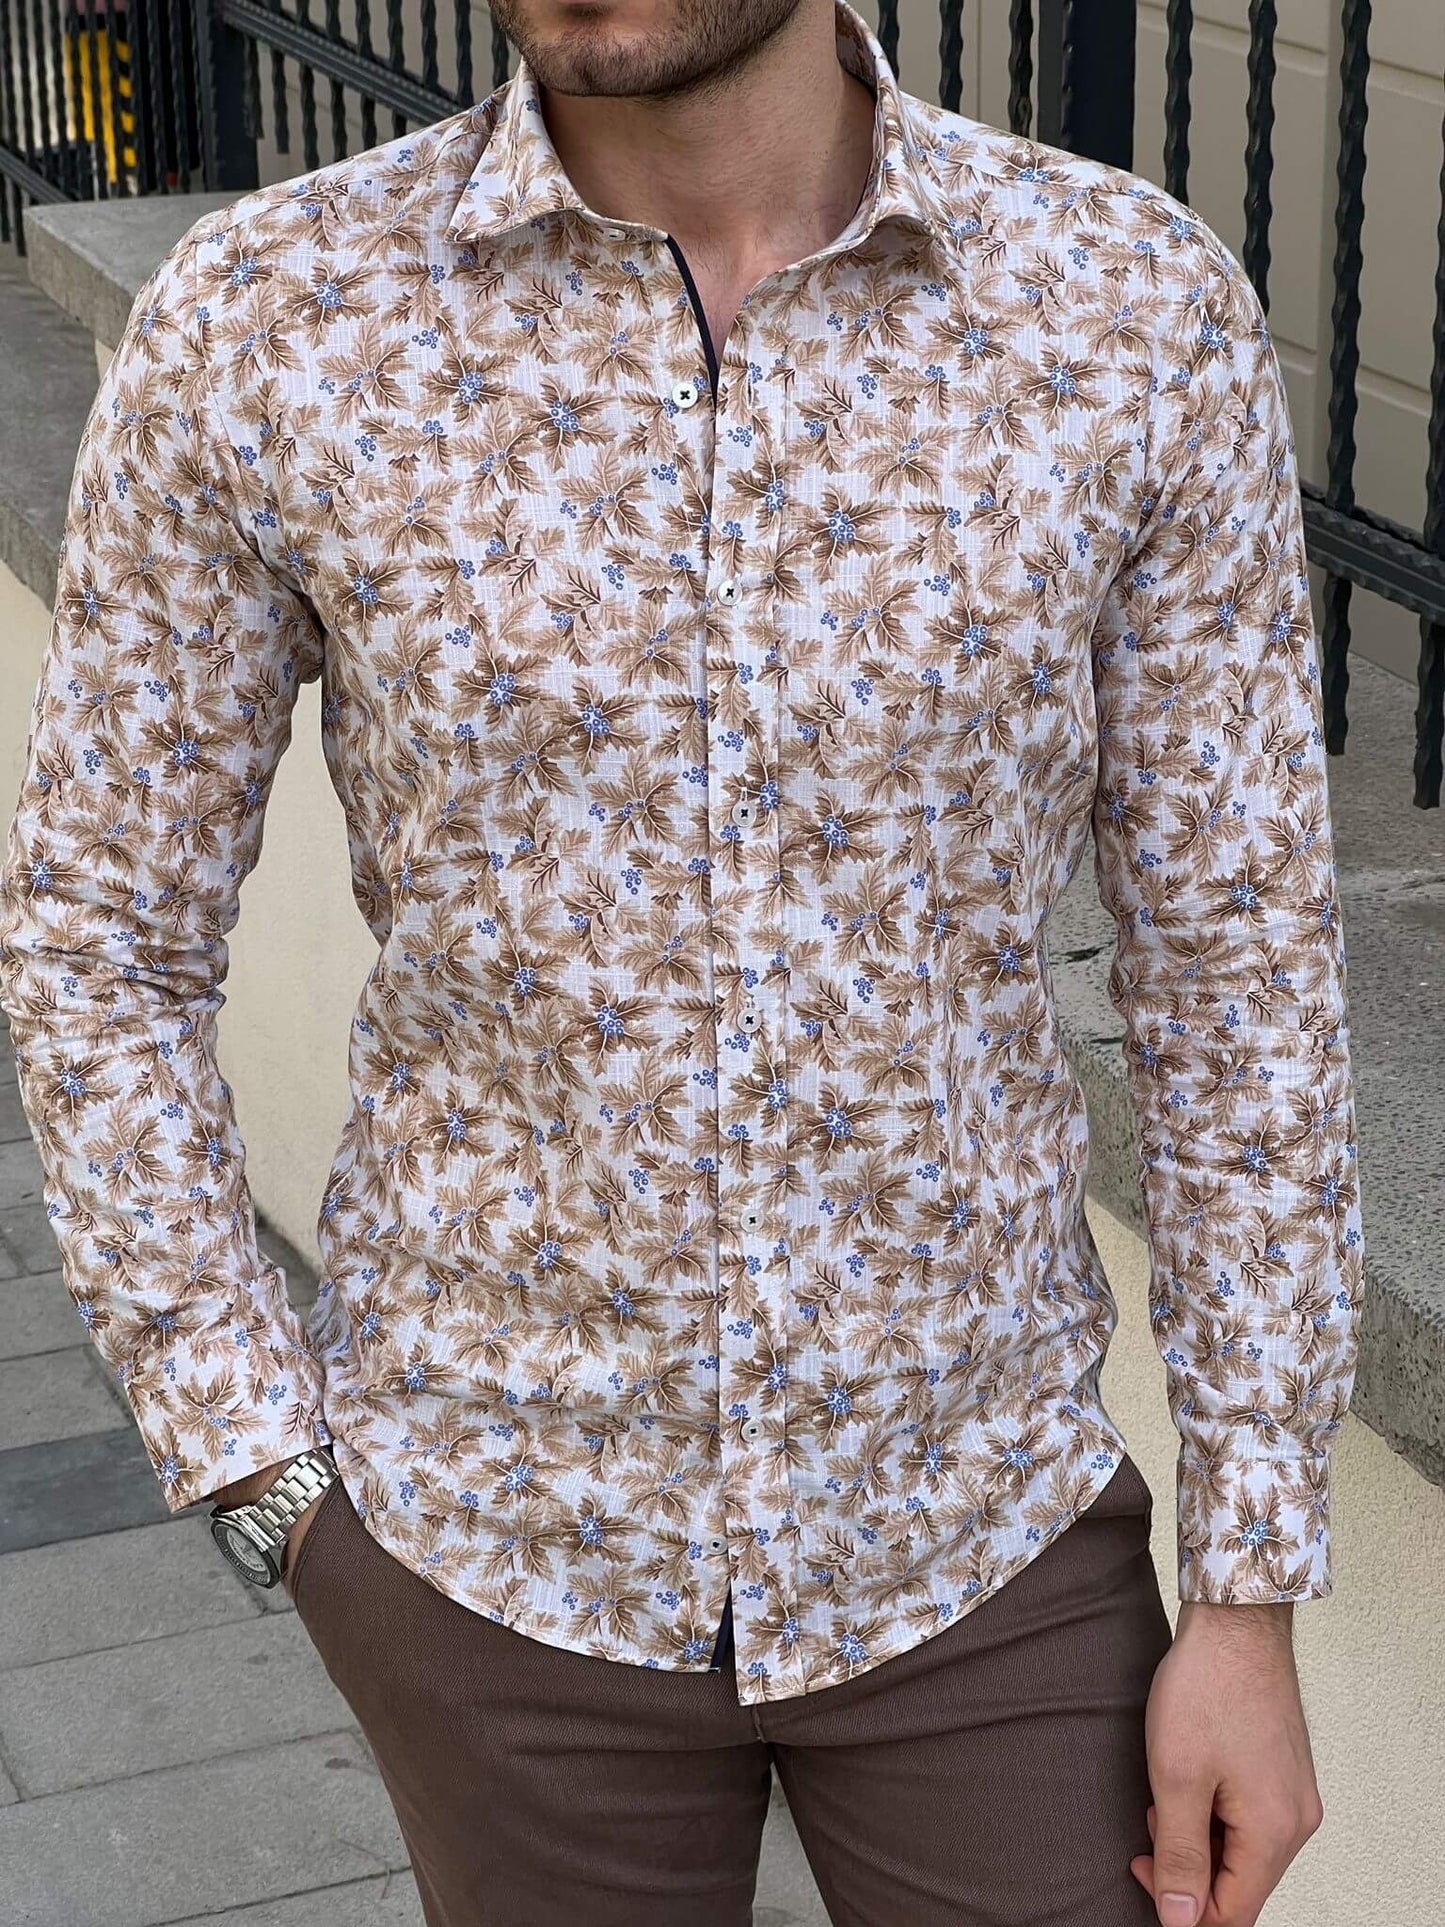 A comfortable and elegant floral beige cotton shirt for any occasion